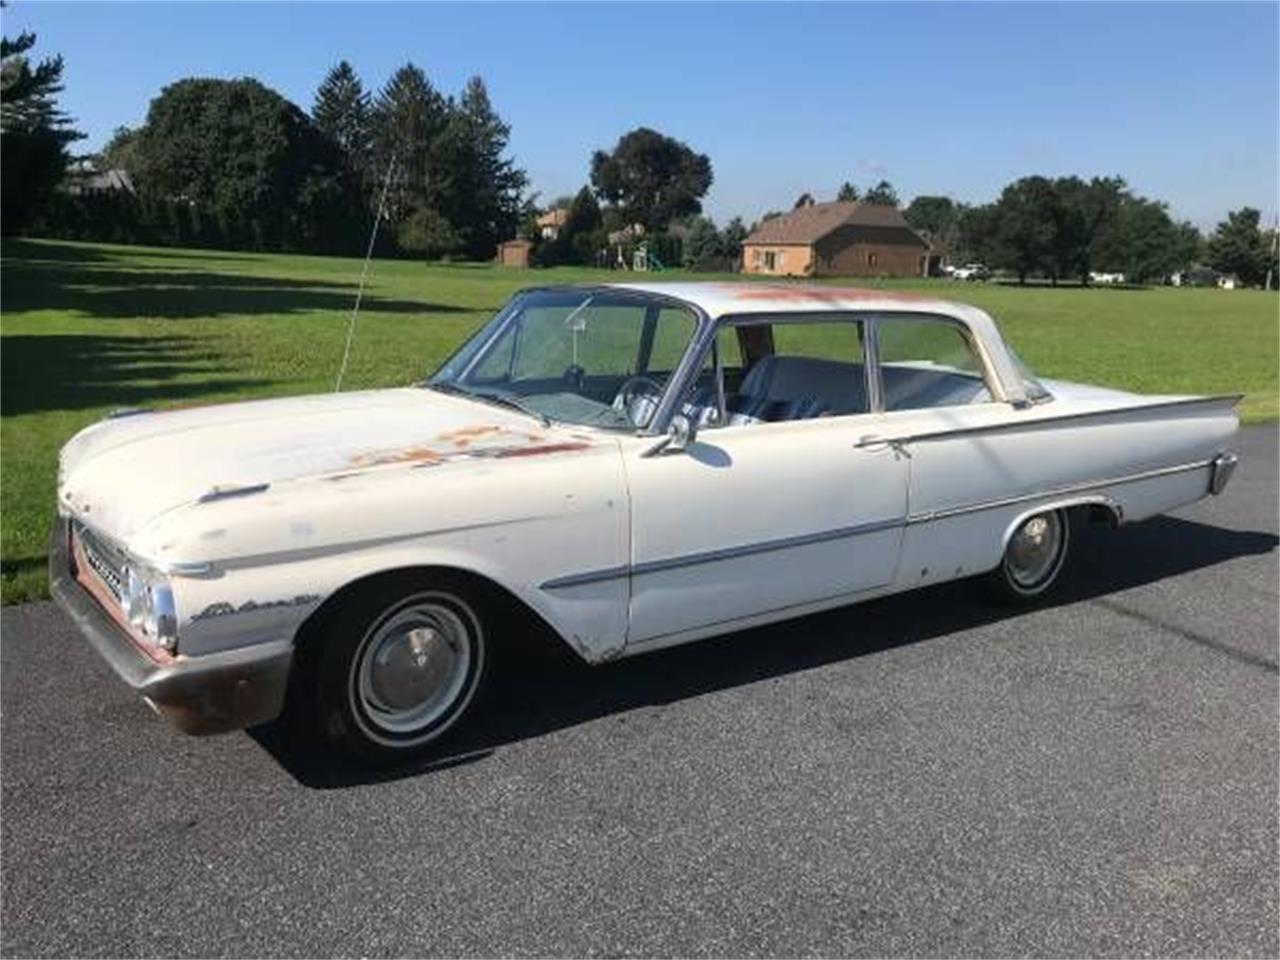 1961 ford fairlane 500 for sale classiccars com cc 1161132 1961 ford fairlane 500 for sale